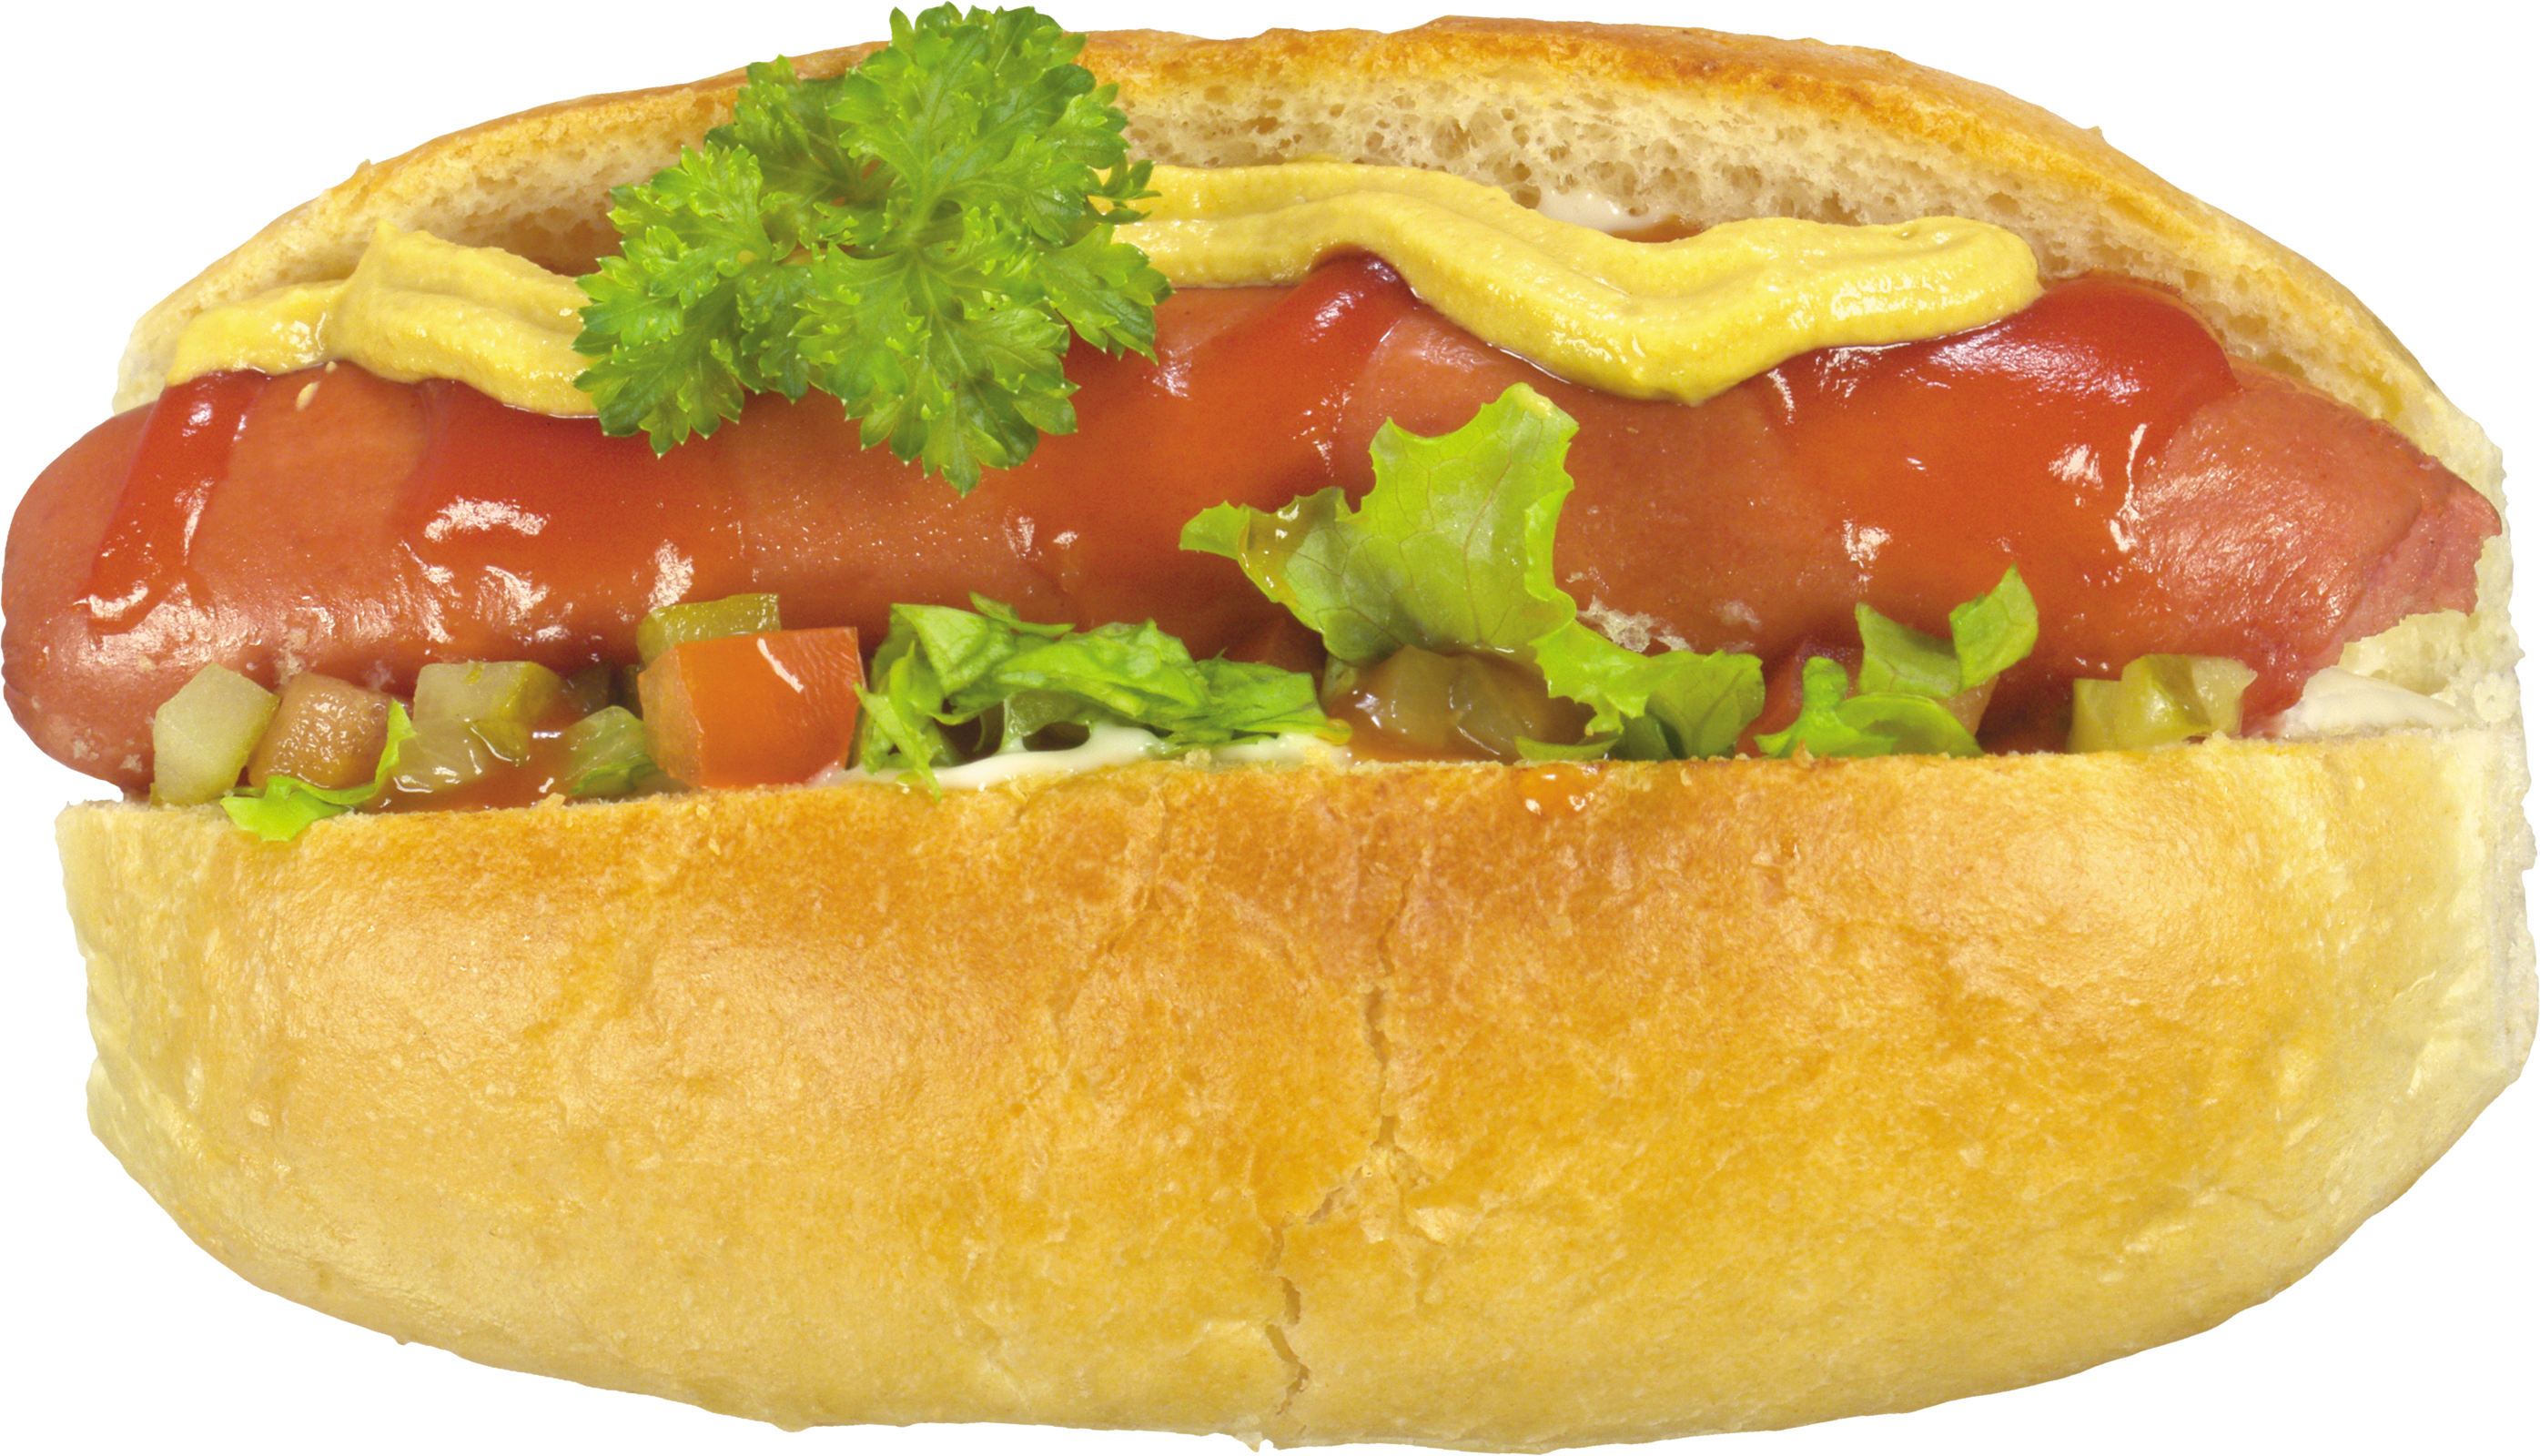 Download Hot Dog PNG Image for Free